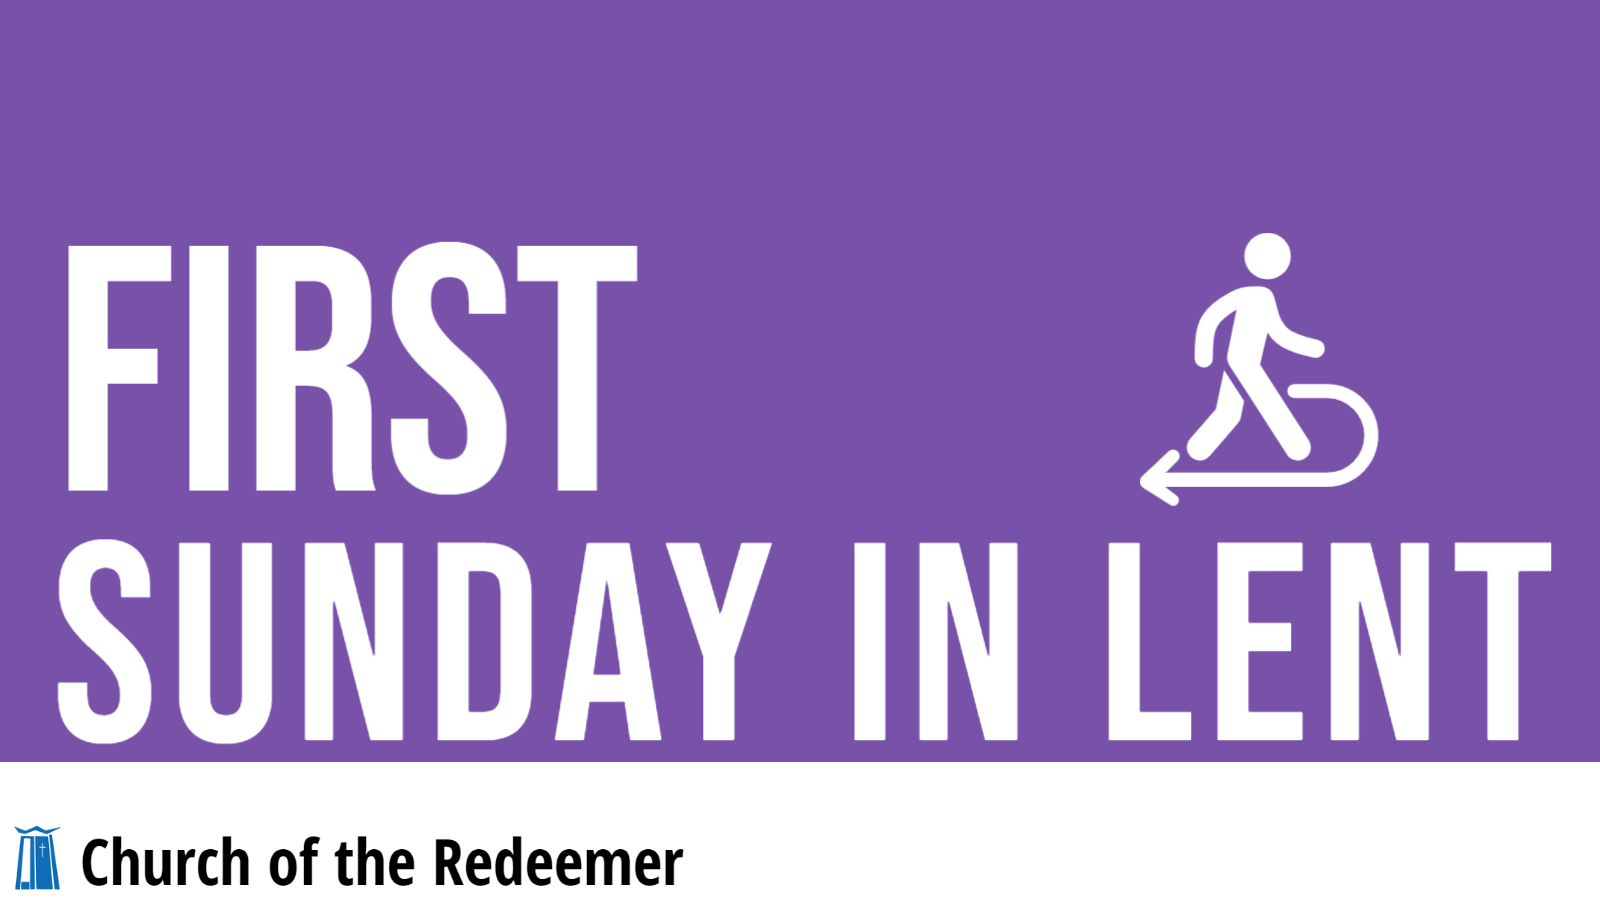 The 1st Sunday in Lent